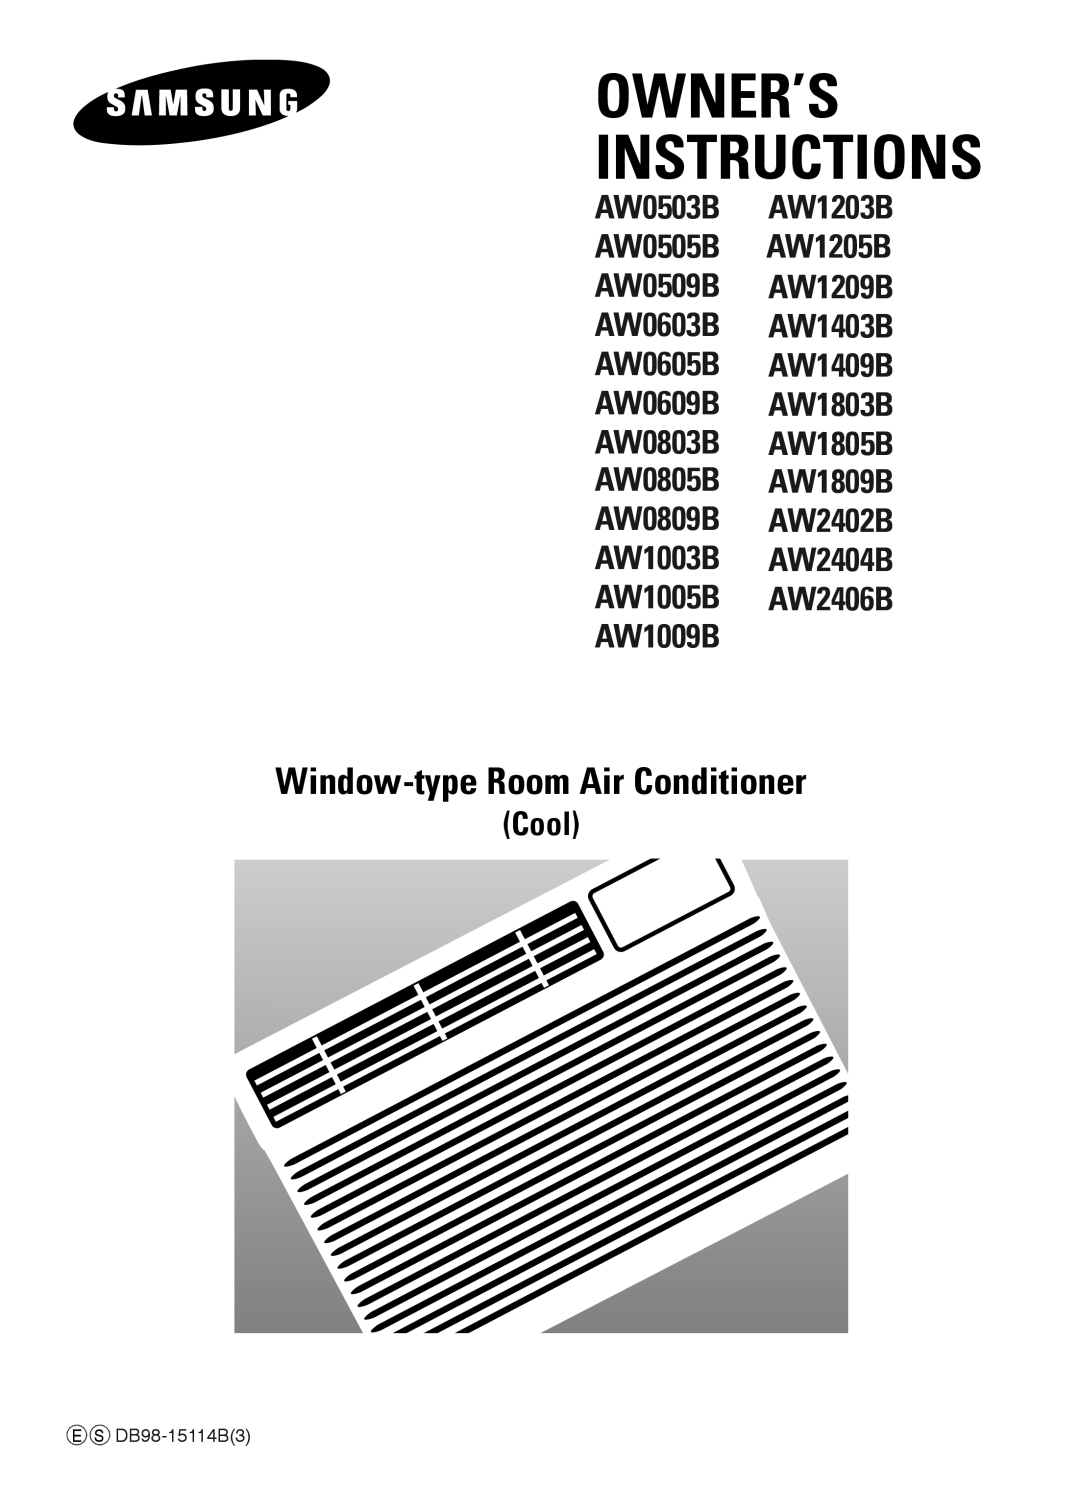 Samsung manual Owner’S Instructions, Window-typeRoom Air Conditioner, AW0503B AW1203B AW0505B AW1205B AW0509B AW1209B 